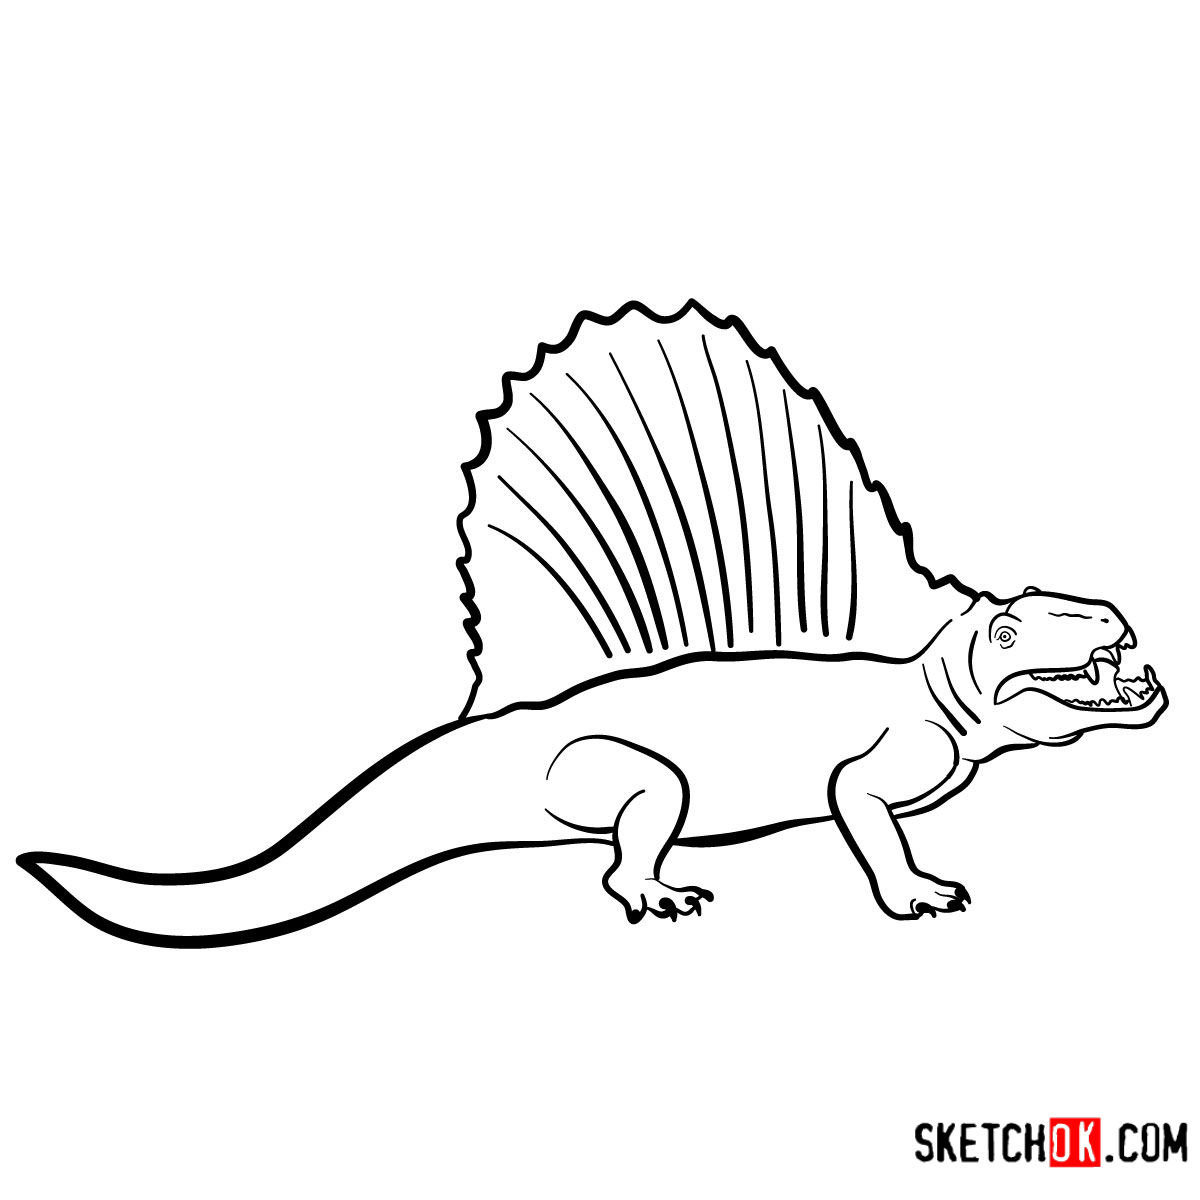 How to draw a Dimetrodon Extinct Animals Sketchok easy drawing guides